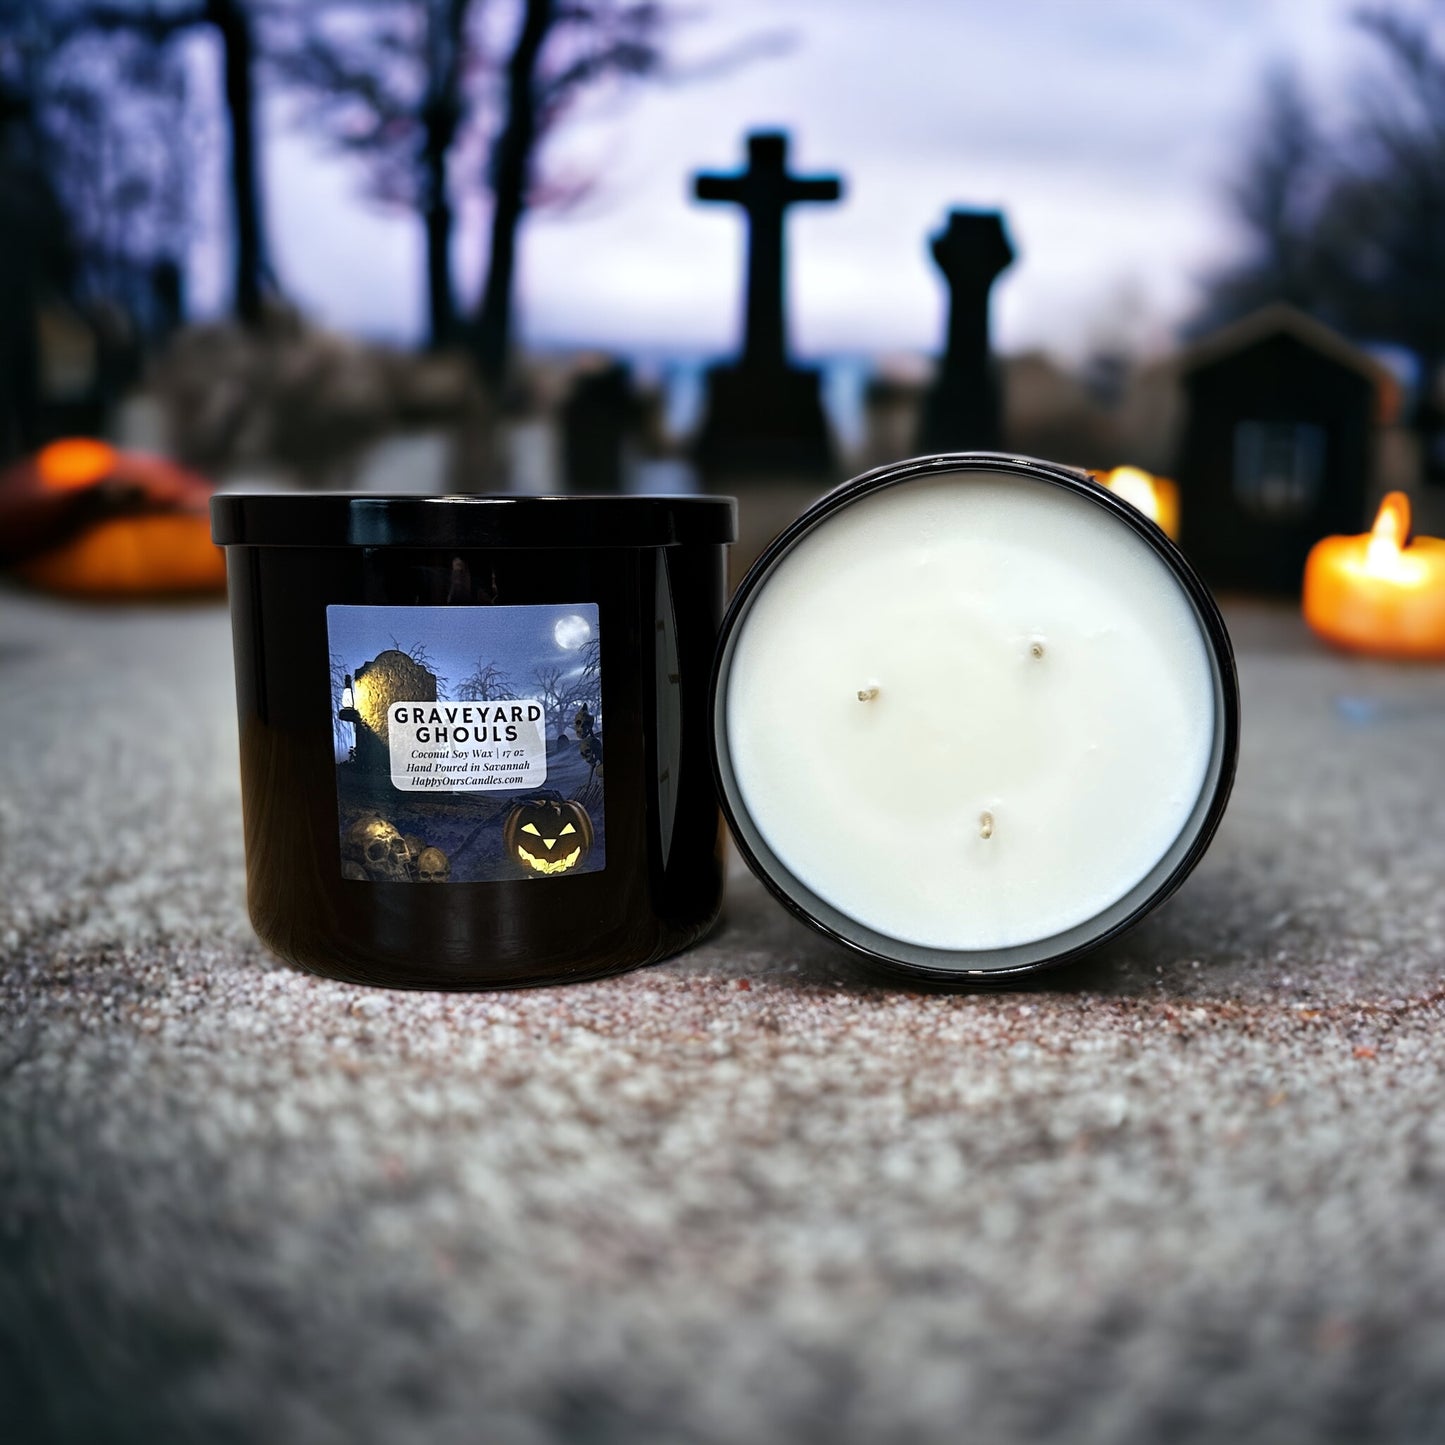 Graveyard Ghouls Scented Candle 17 oz, Triple Wick